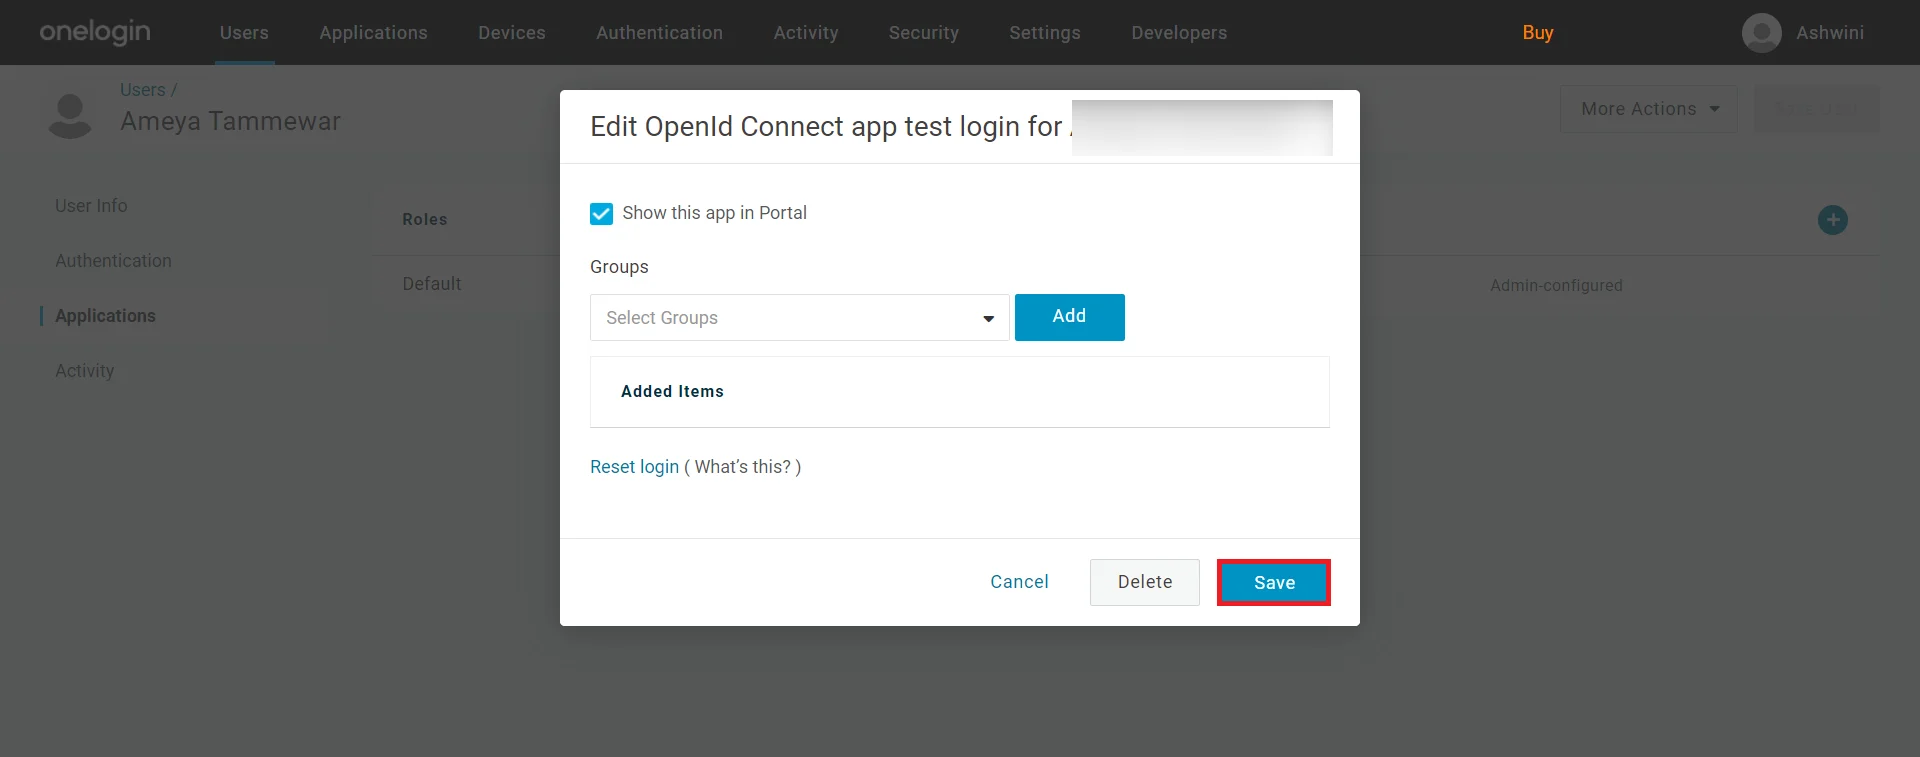 Secure Access with OneLogin Single Sign-On (SSO) Enter redirecturl Magento OneLogin